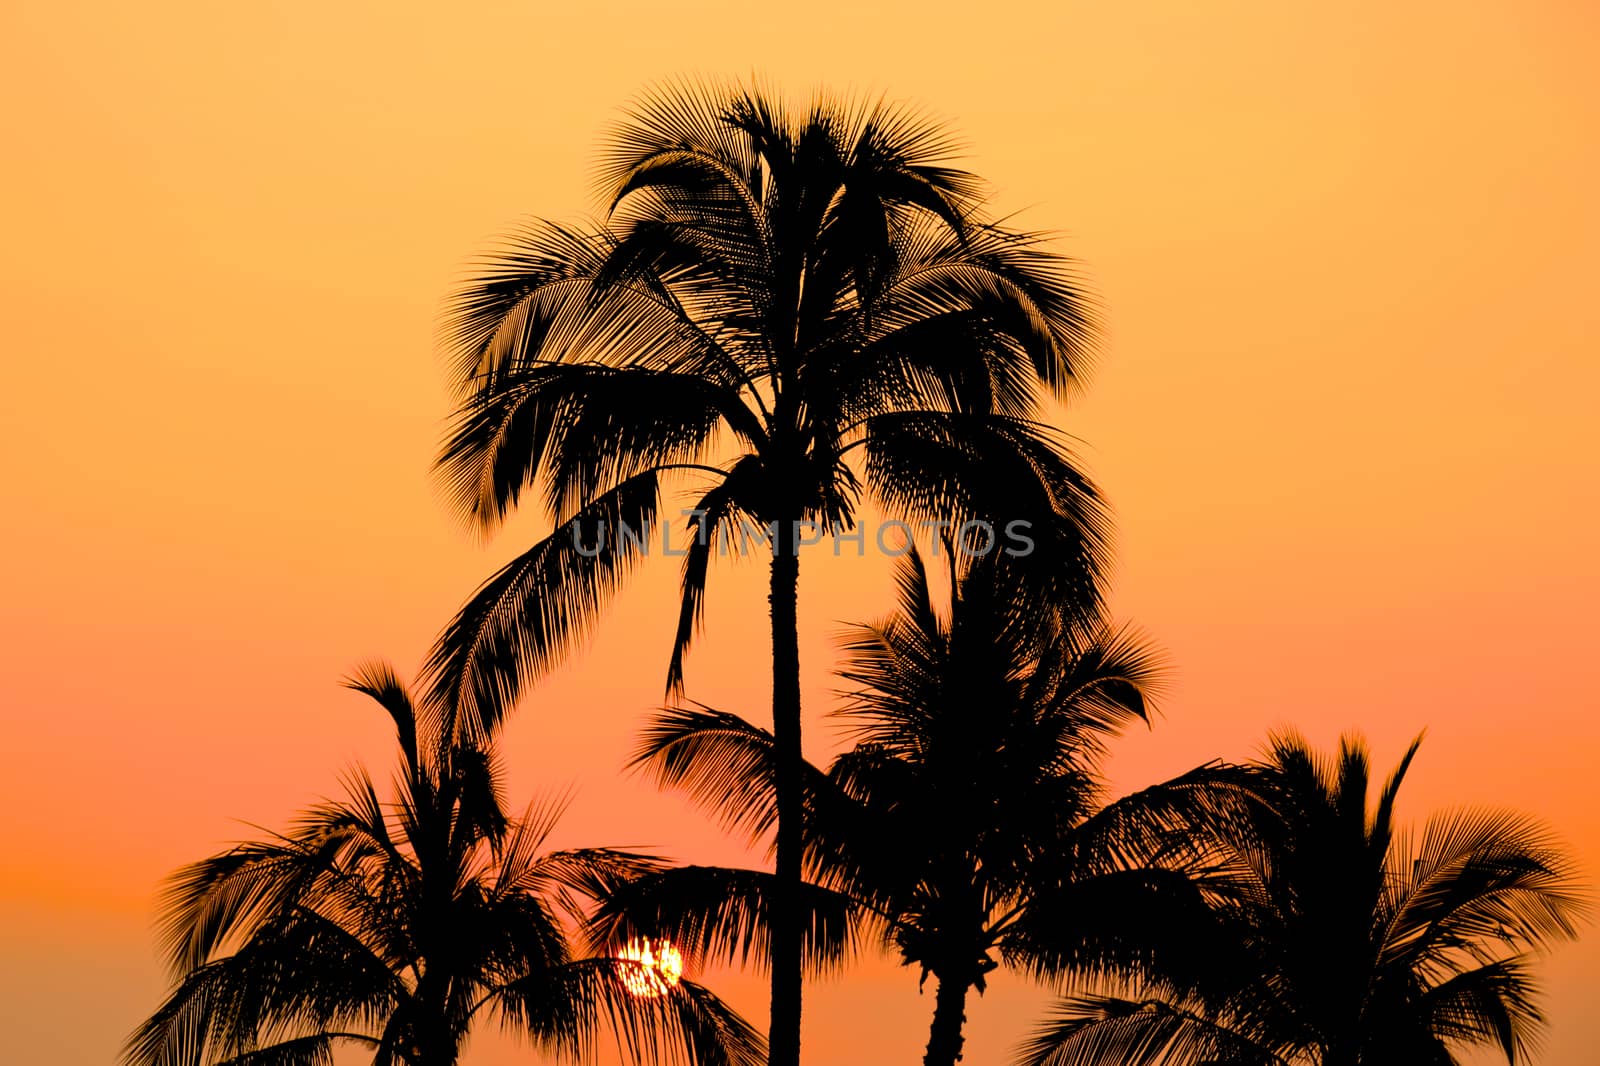 Maui Sunset with Palm Trees by jhlemmer